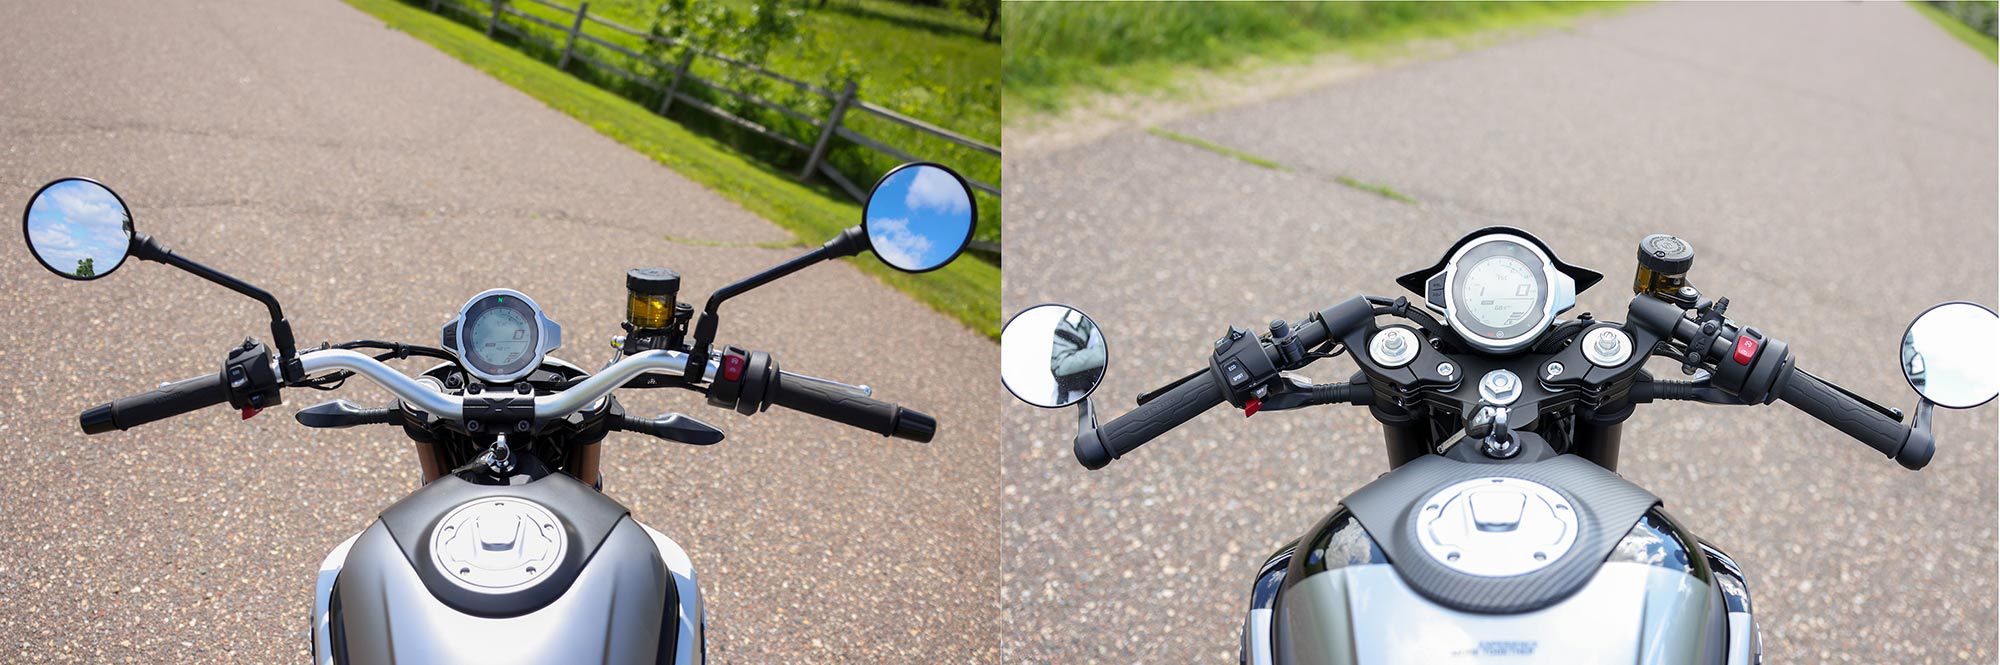 More differences between the 700CL-X (left) and 700CL-X Sport (right). Notice the bar-end mirrors on the Sport, versus the traditional mirror setup base model. All 700CL-X models come with an LED headlight, taillights, auto-canceling turn signals, stylized daytime running lights, and a center-mounted gauge.